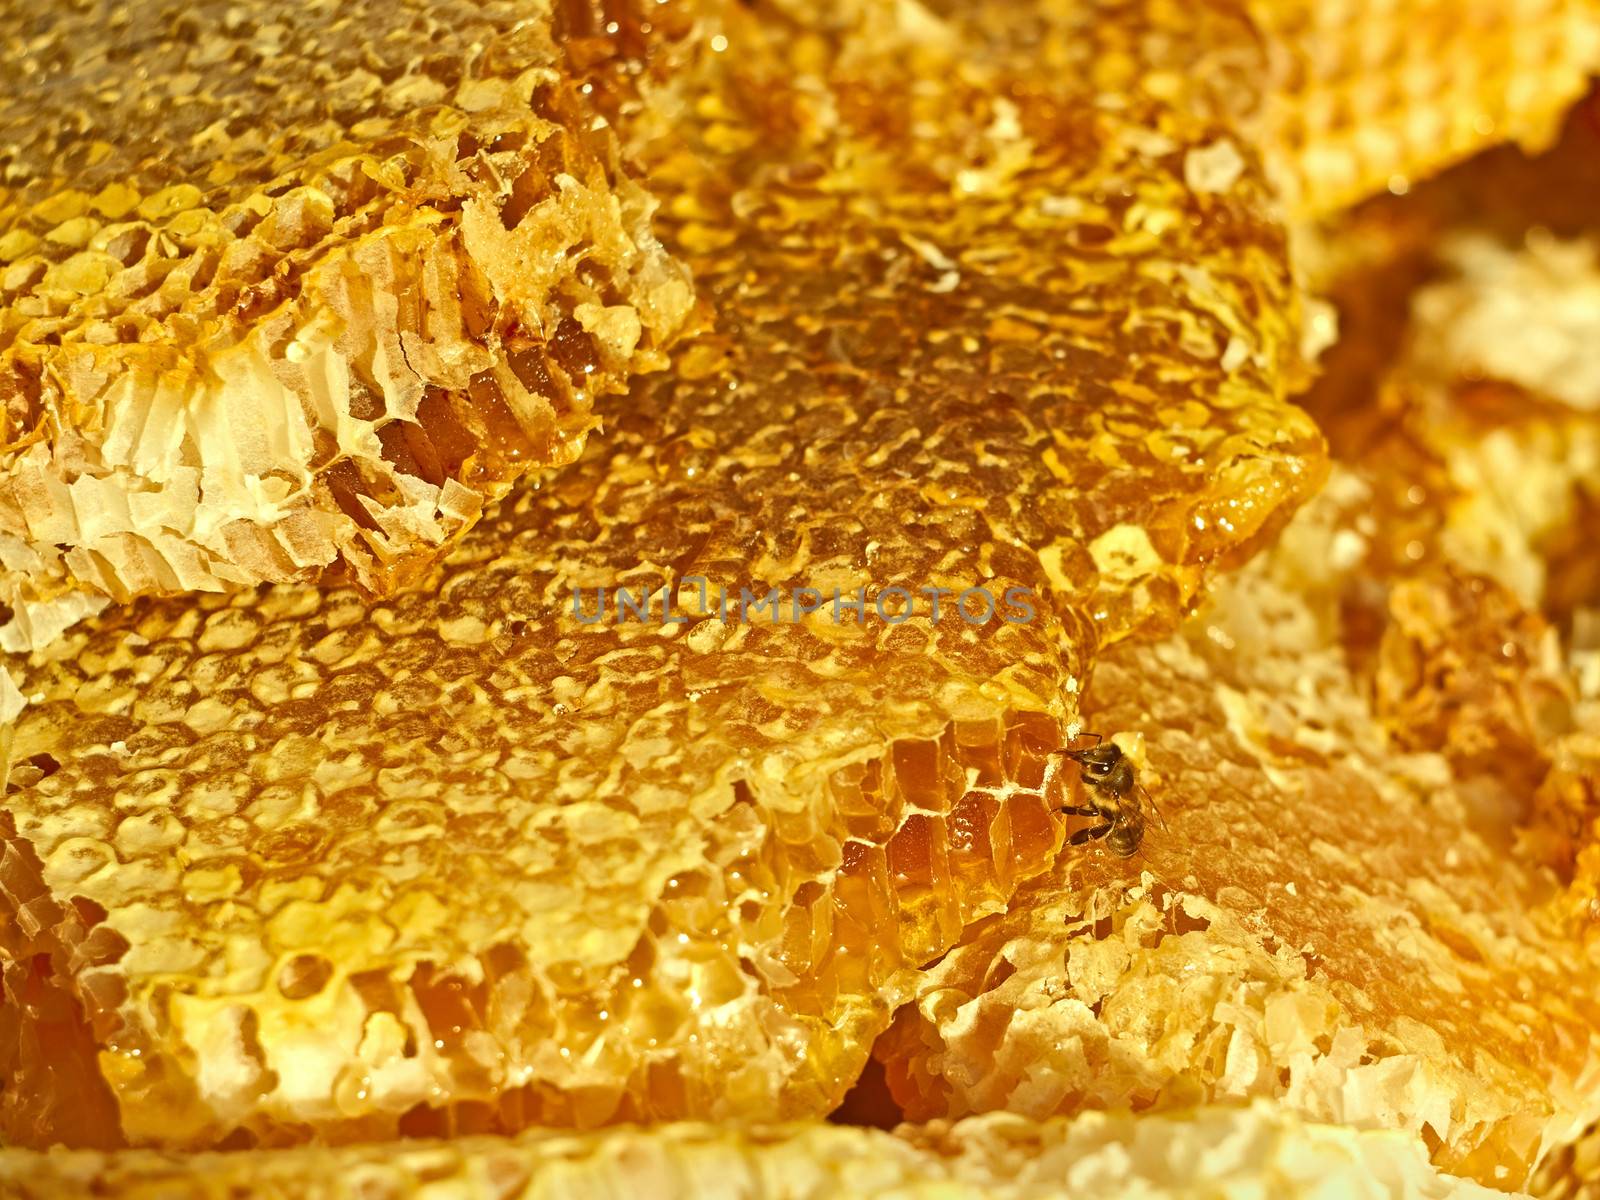 Bee on the honeycomb surface by qiiip